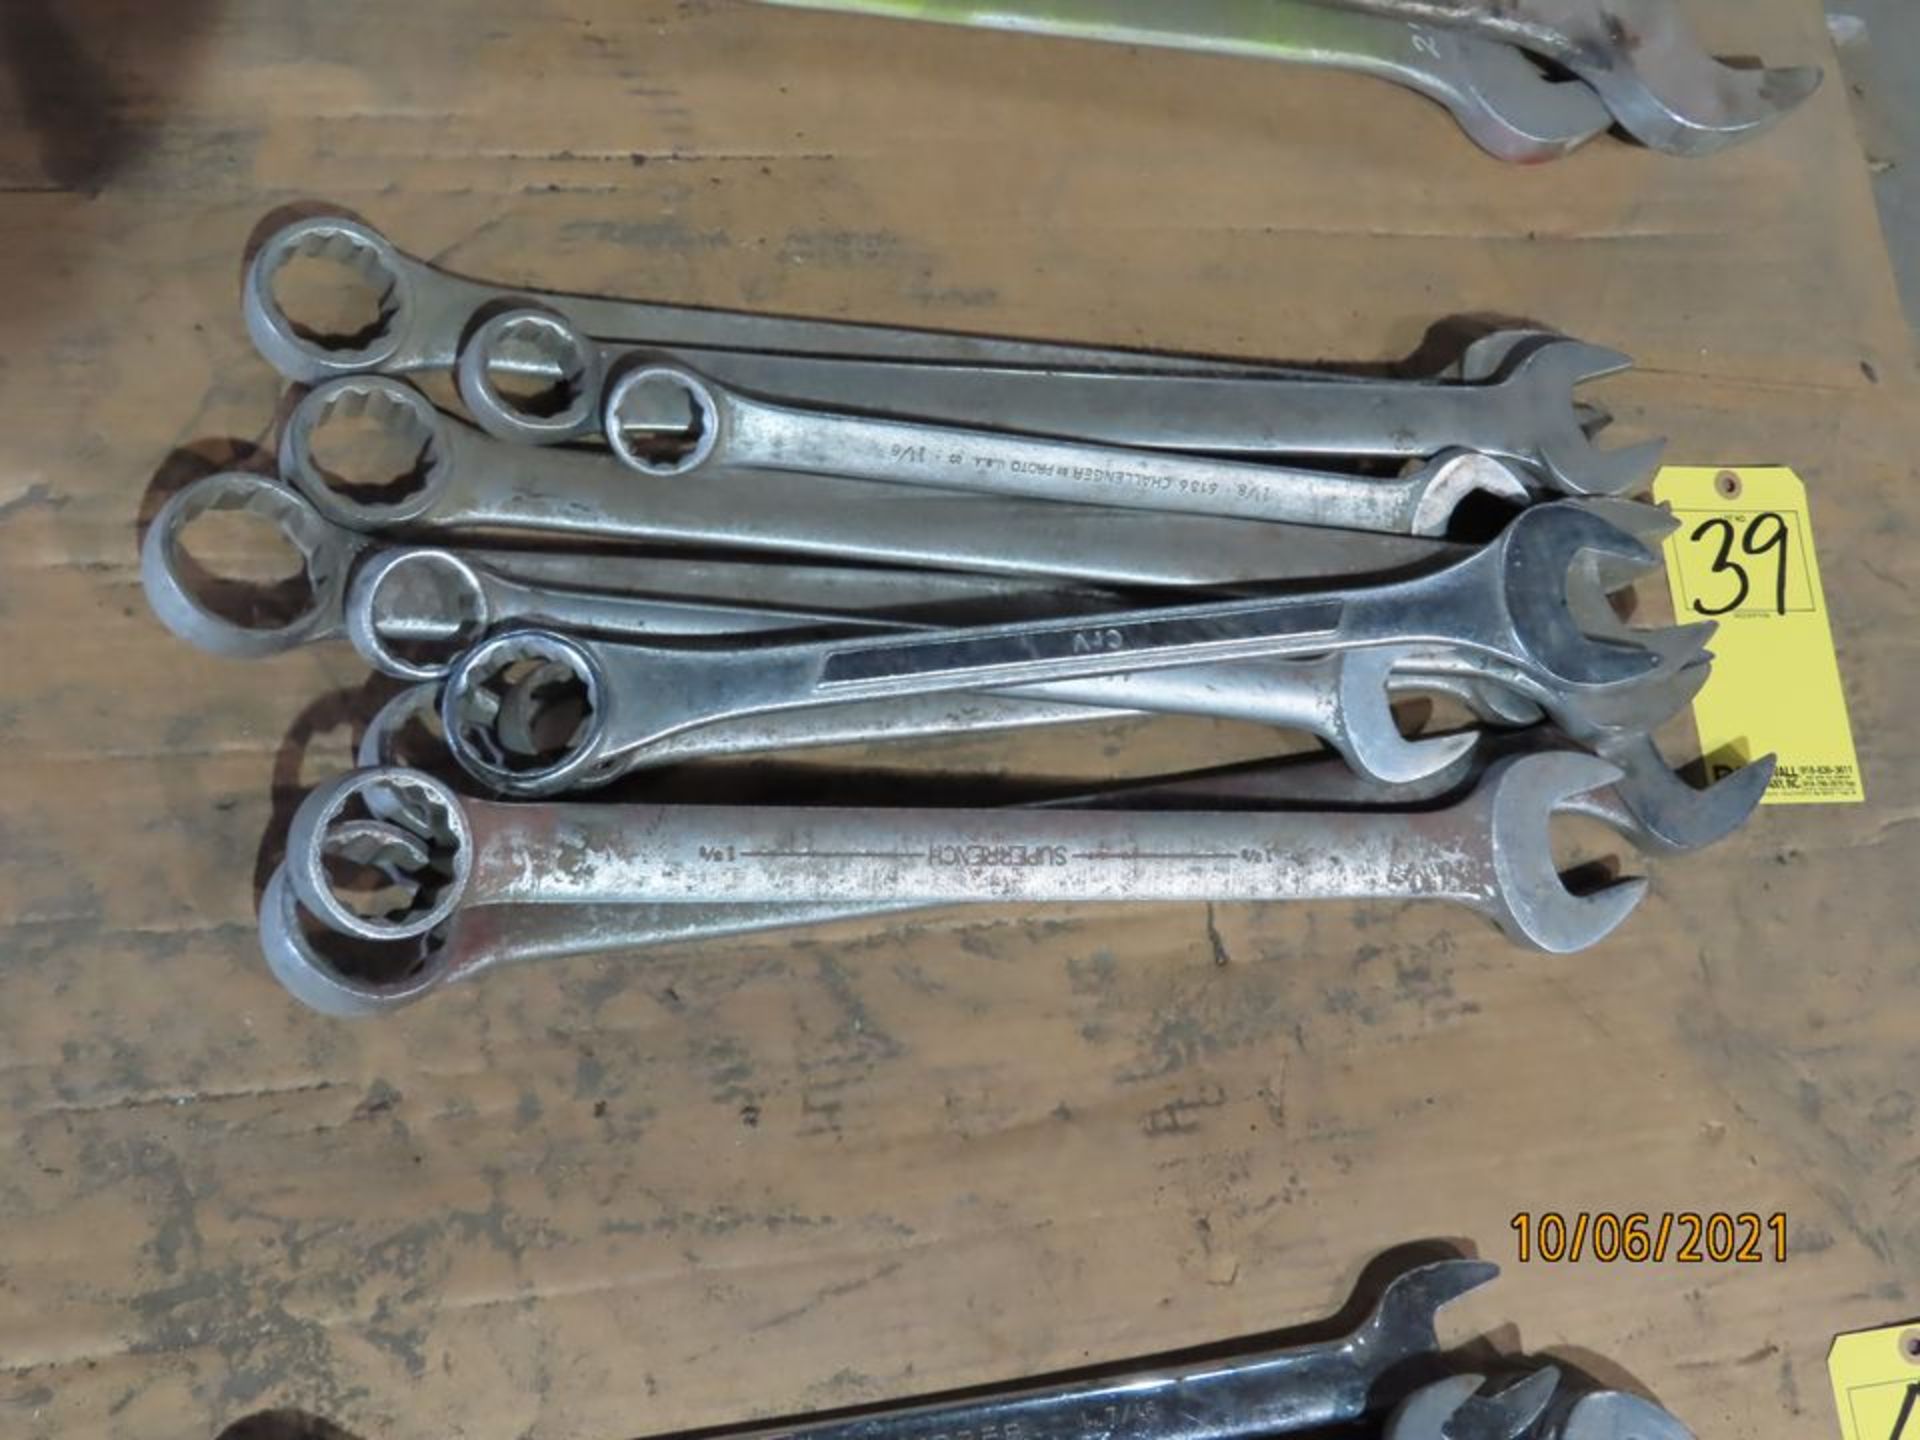 LOT MISC. END WRENCHES, 1-1/8" - 1-3/16"